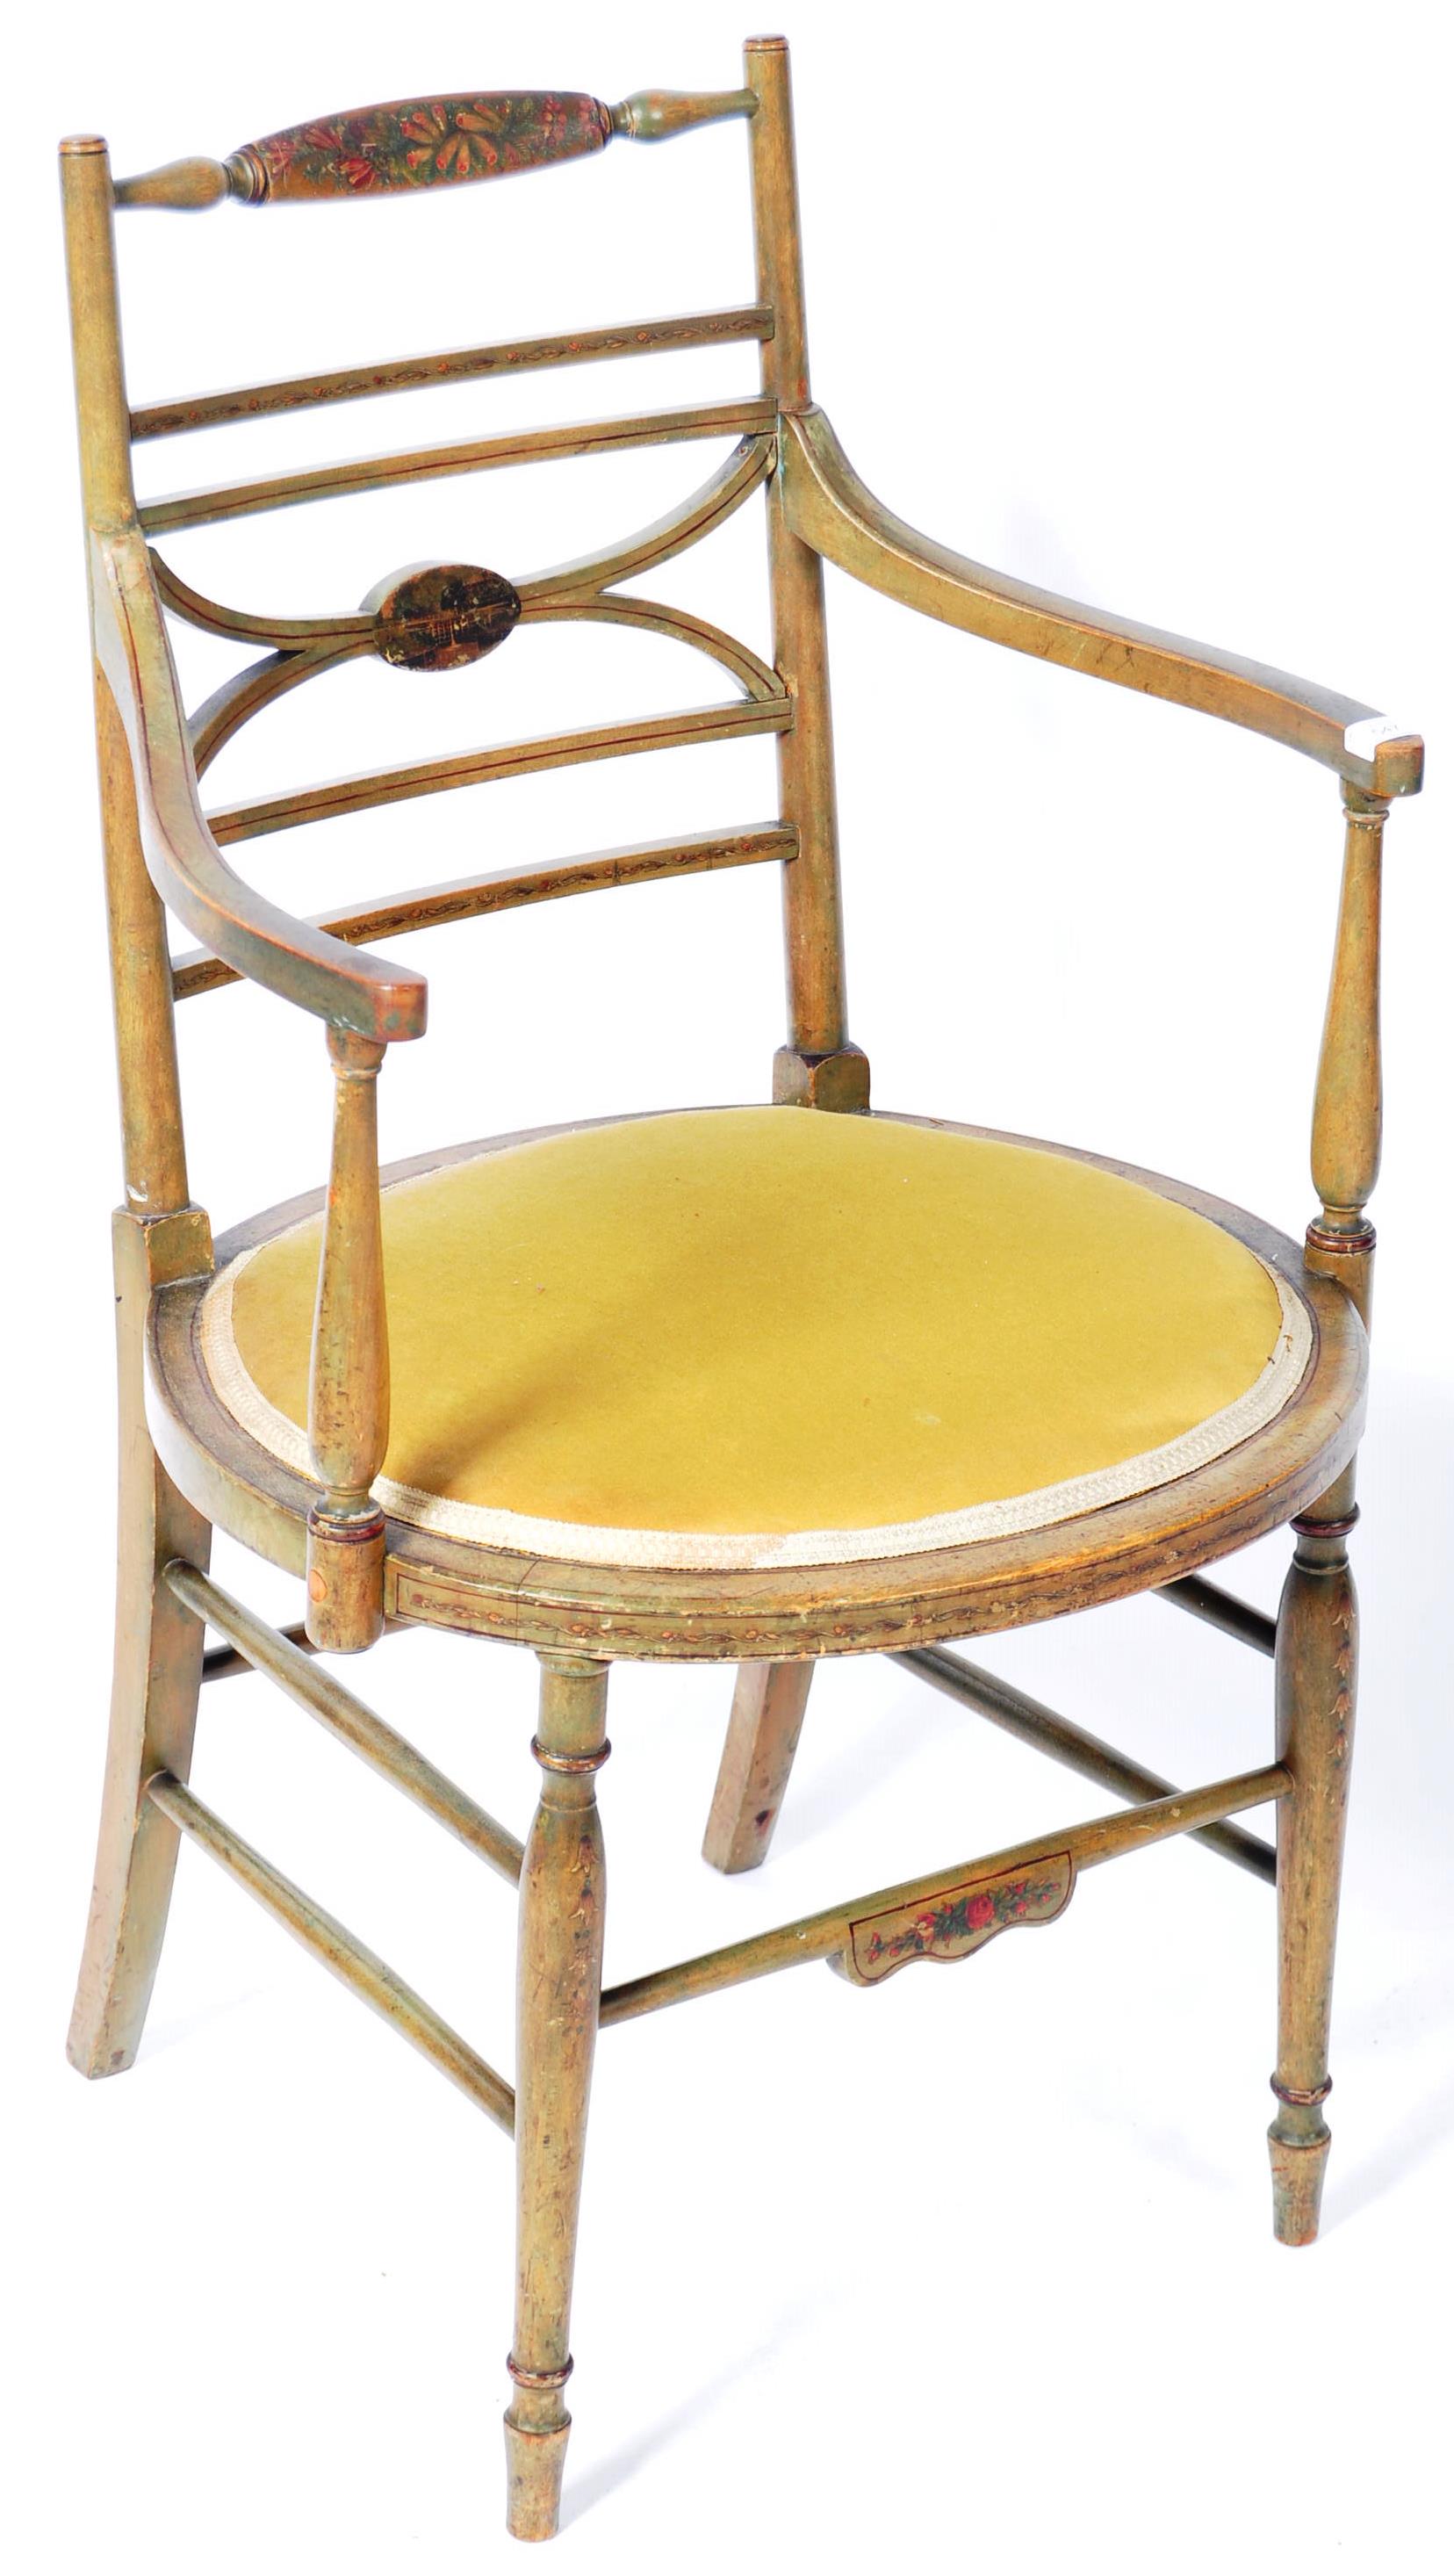 EARLY 19TH CENTURY GEORGIAN REGENCY PAINTED ARM CHAIR - Image 2 of 8